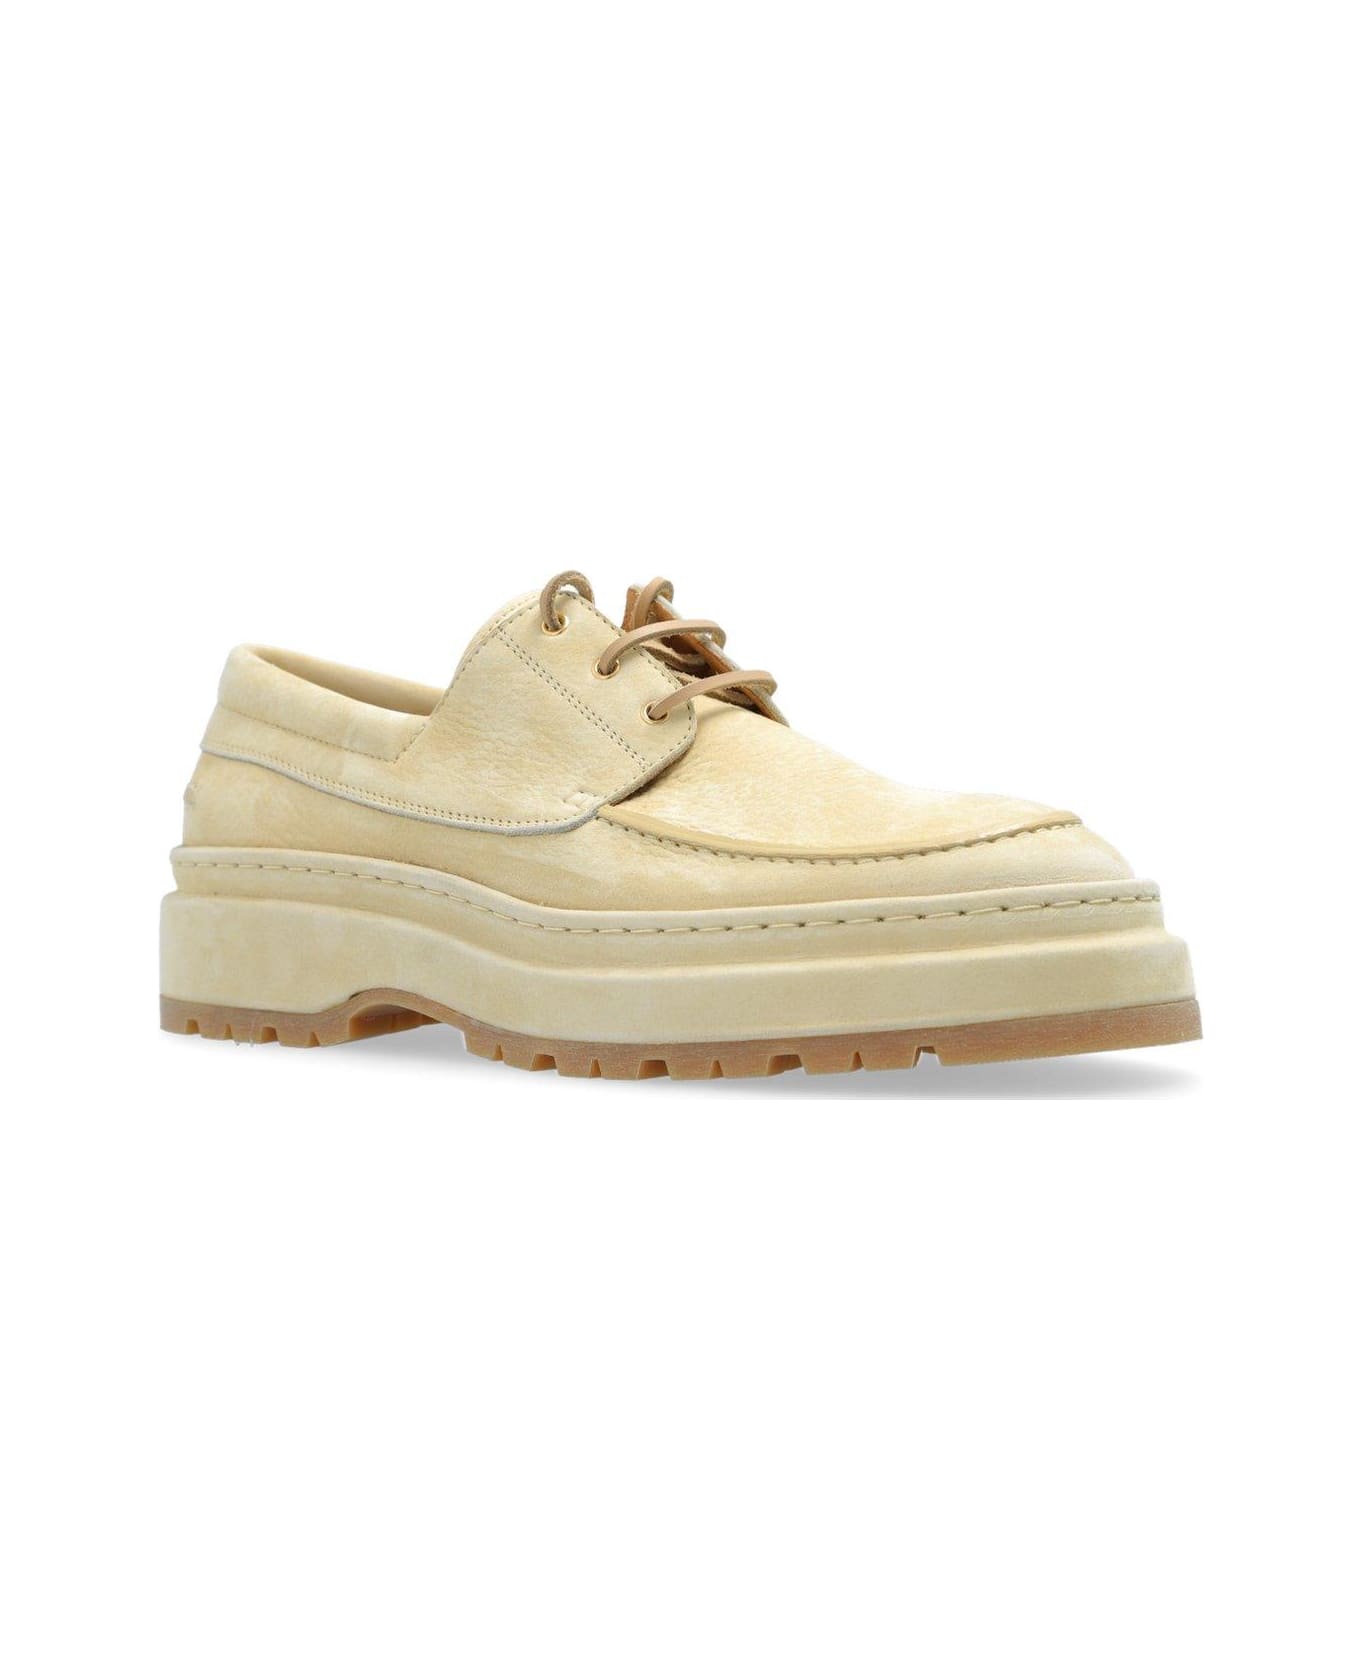 Jacquemus Double Boat Shoes - YELLOW レースアップシューズ